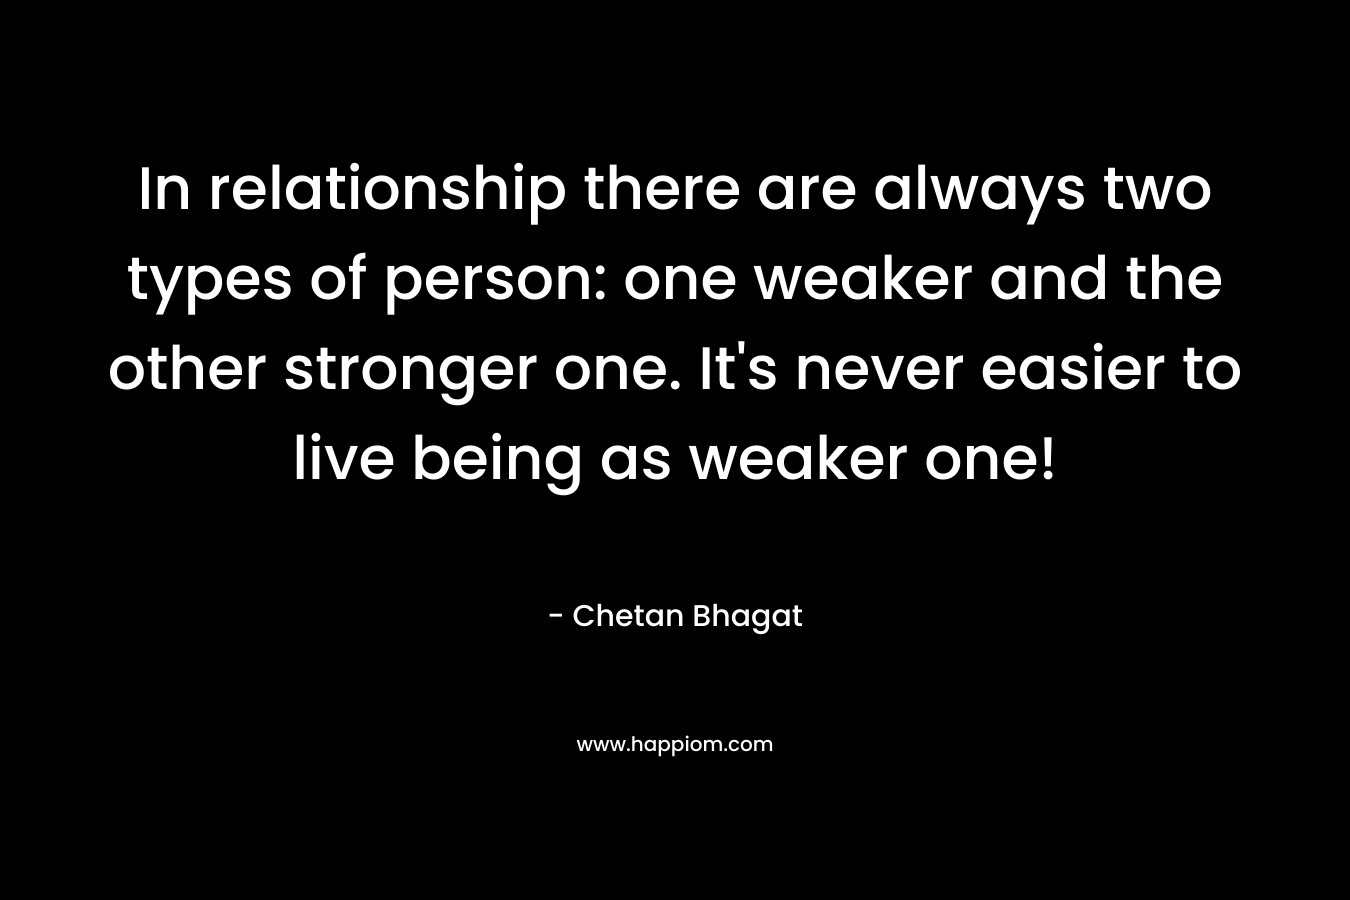 In relationship there are always two types of person: one weaker and the other stronger one. It’s never easier to live being as weaker one! – Chetan Bhagat